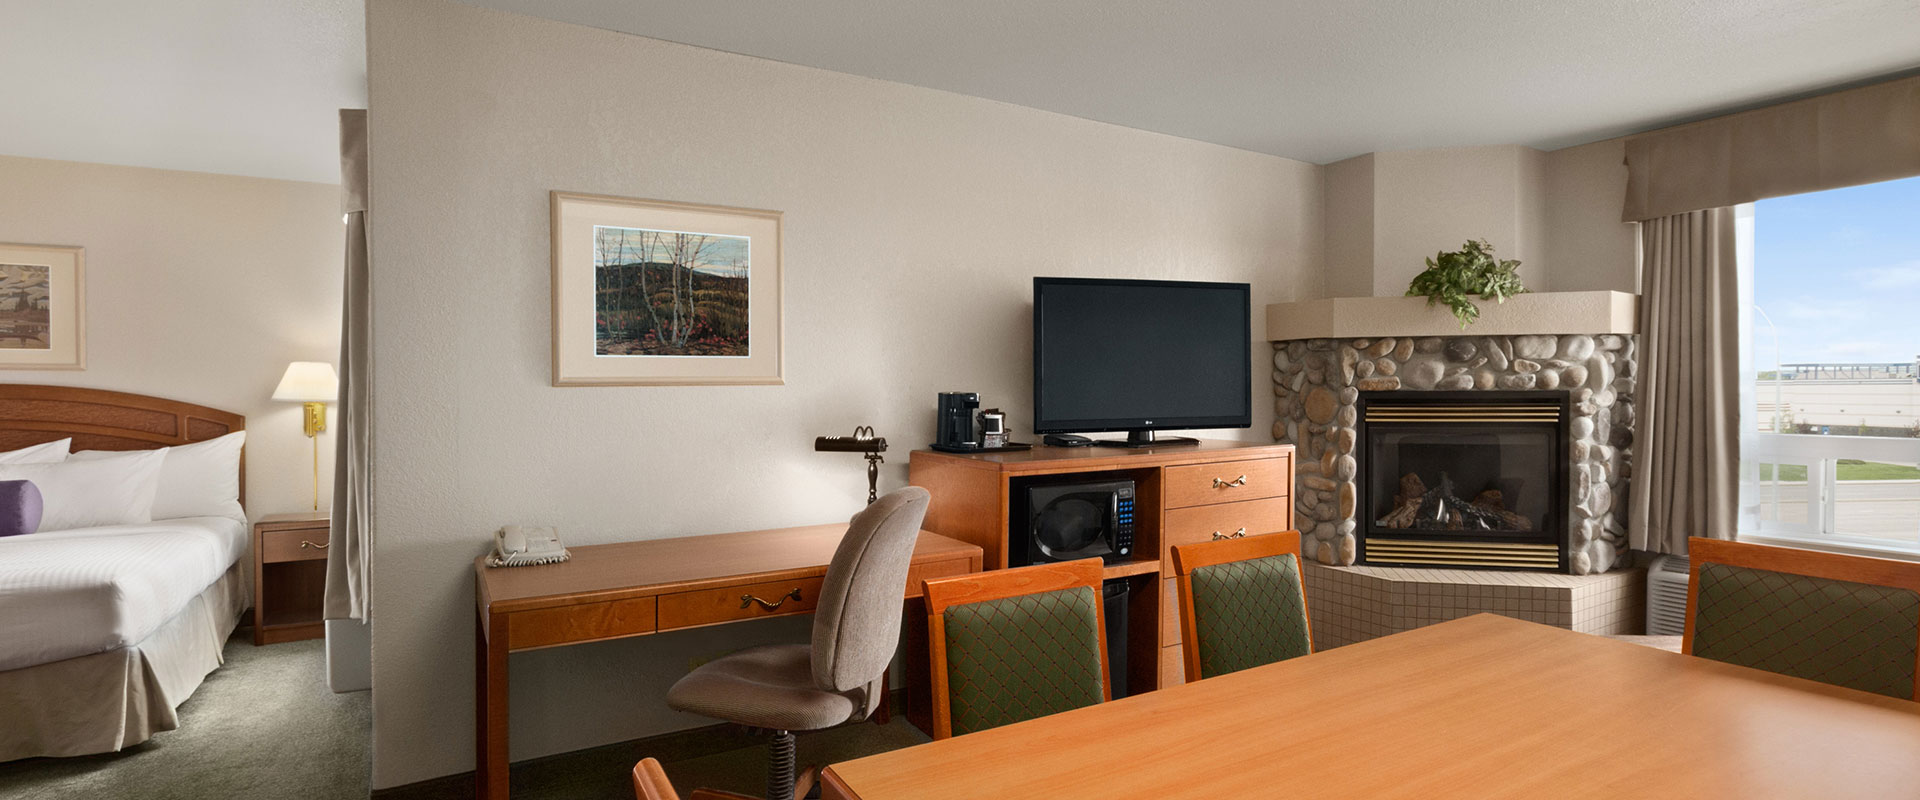 Large view of a one bed suite with workspace, office chair, TV, microwave and stone fireplace at Days Inn Red Deer, Alberta.
